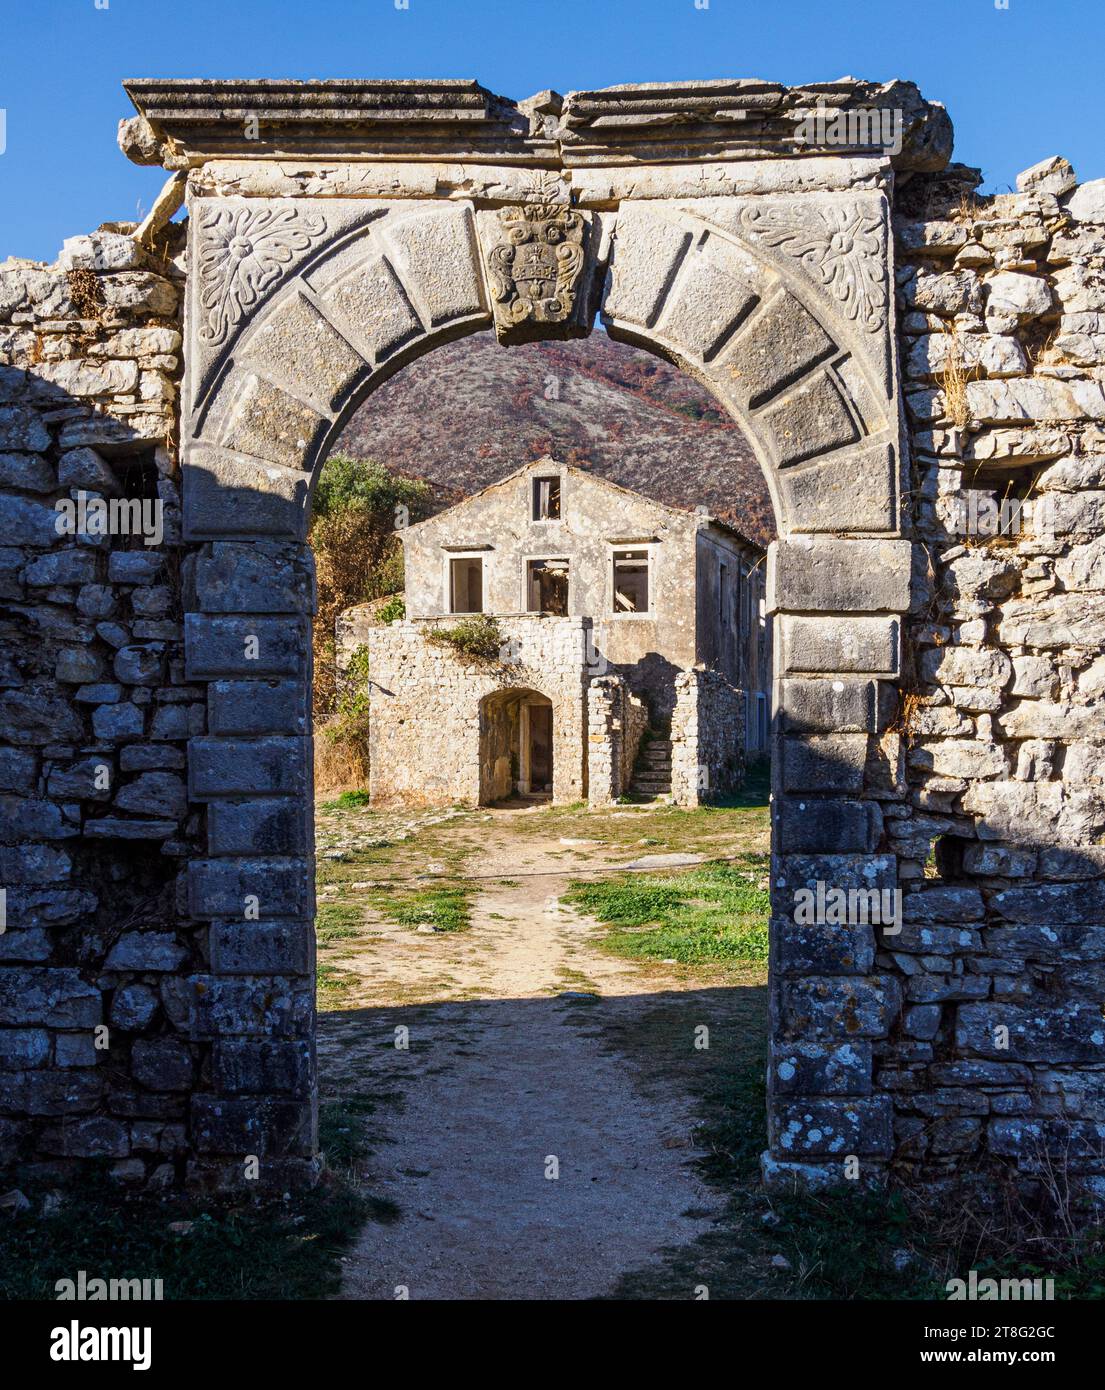 Ruined schoolhouse and arch in the partially abandoned village of Old Perithia (Palea Perithea) on the high slopes of Mt Pandokratoras in Corfu Greece Stock Photo